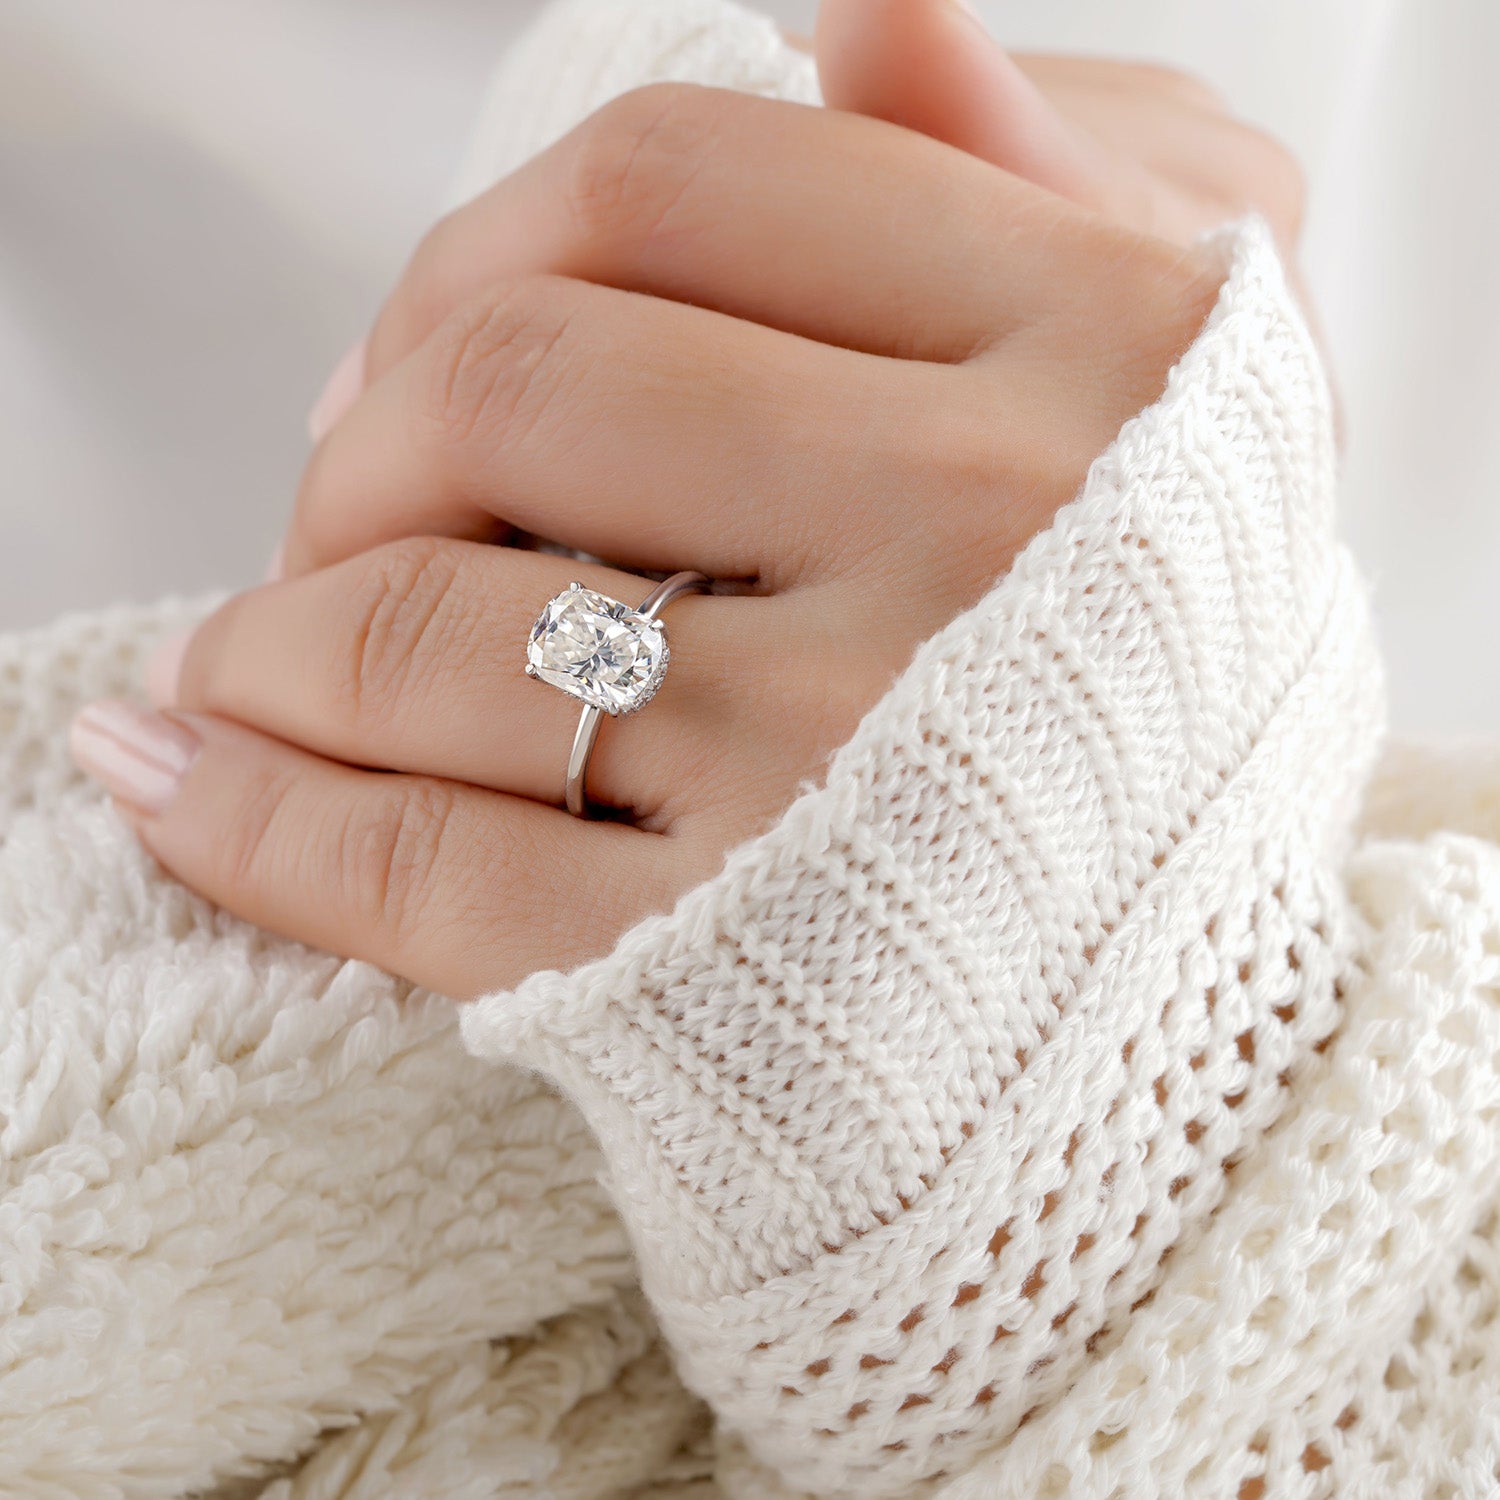 5 Ways To Elevate Your Engagement Ring with Engraving